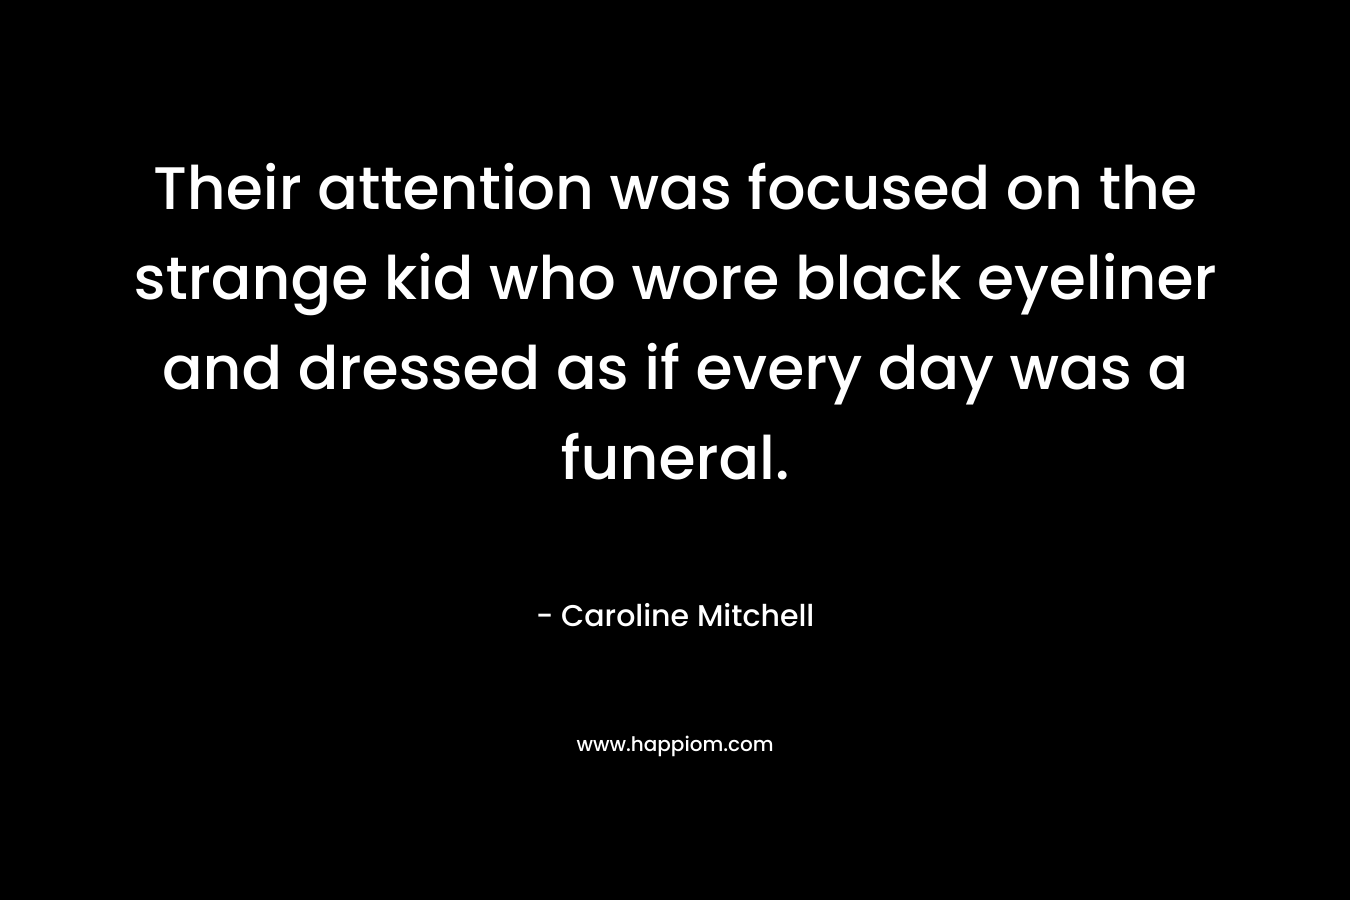 Their attention was focused on the strange kid who wore black eyeliner and dressed as if every day was a funeral. – Caroline Mitchell